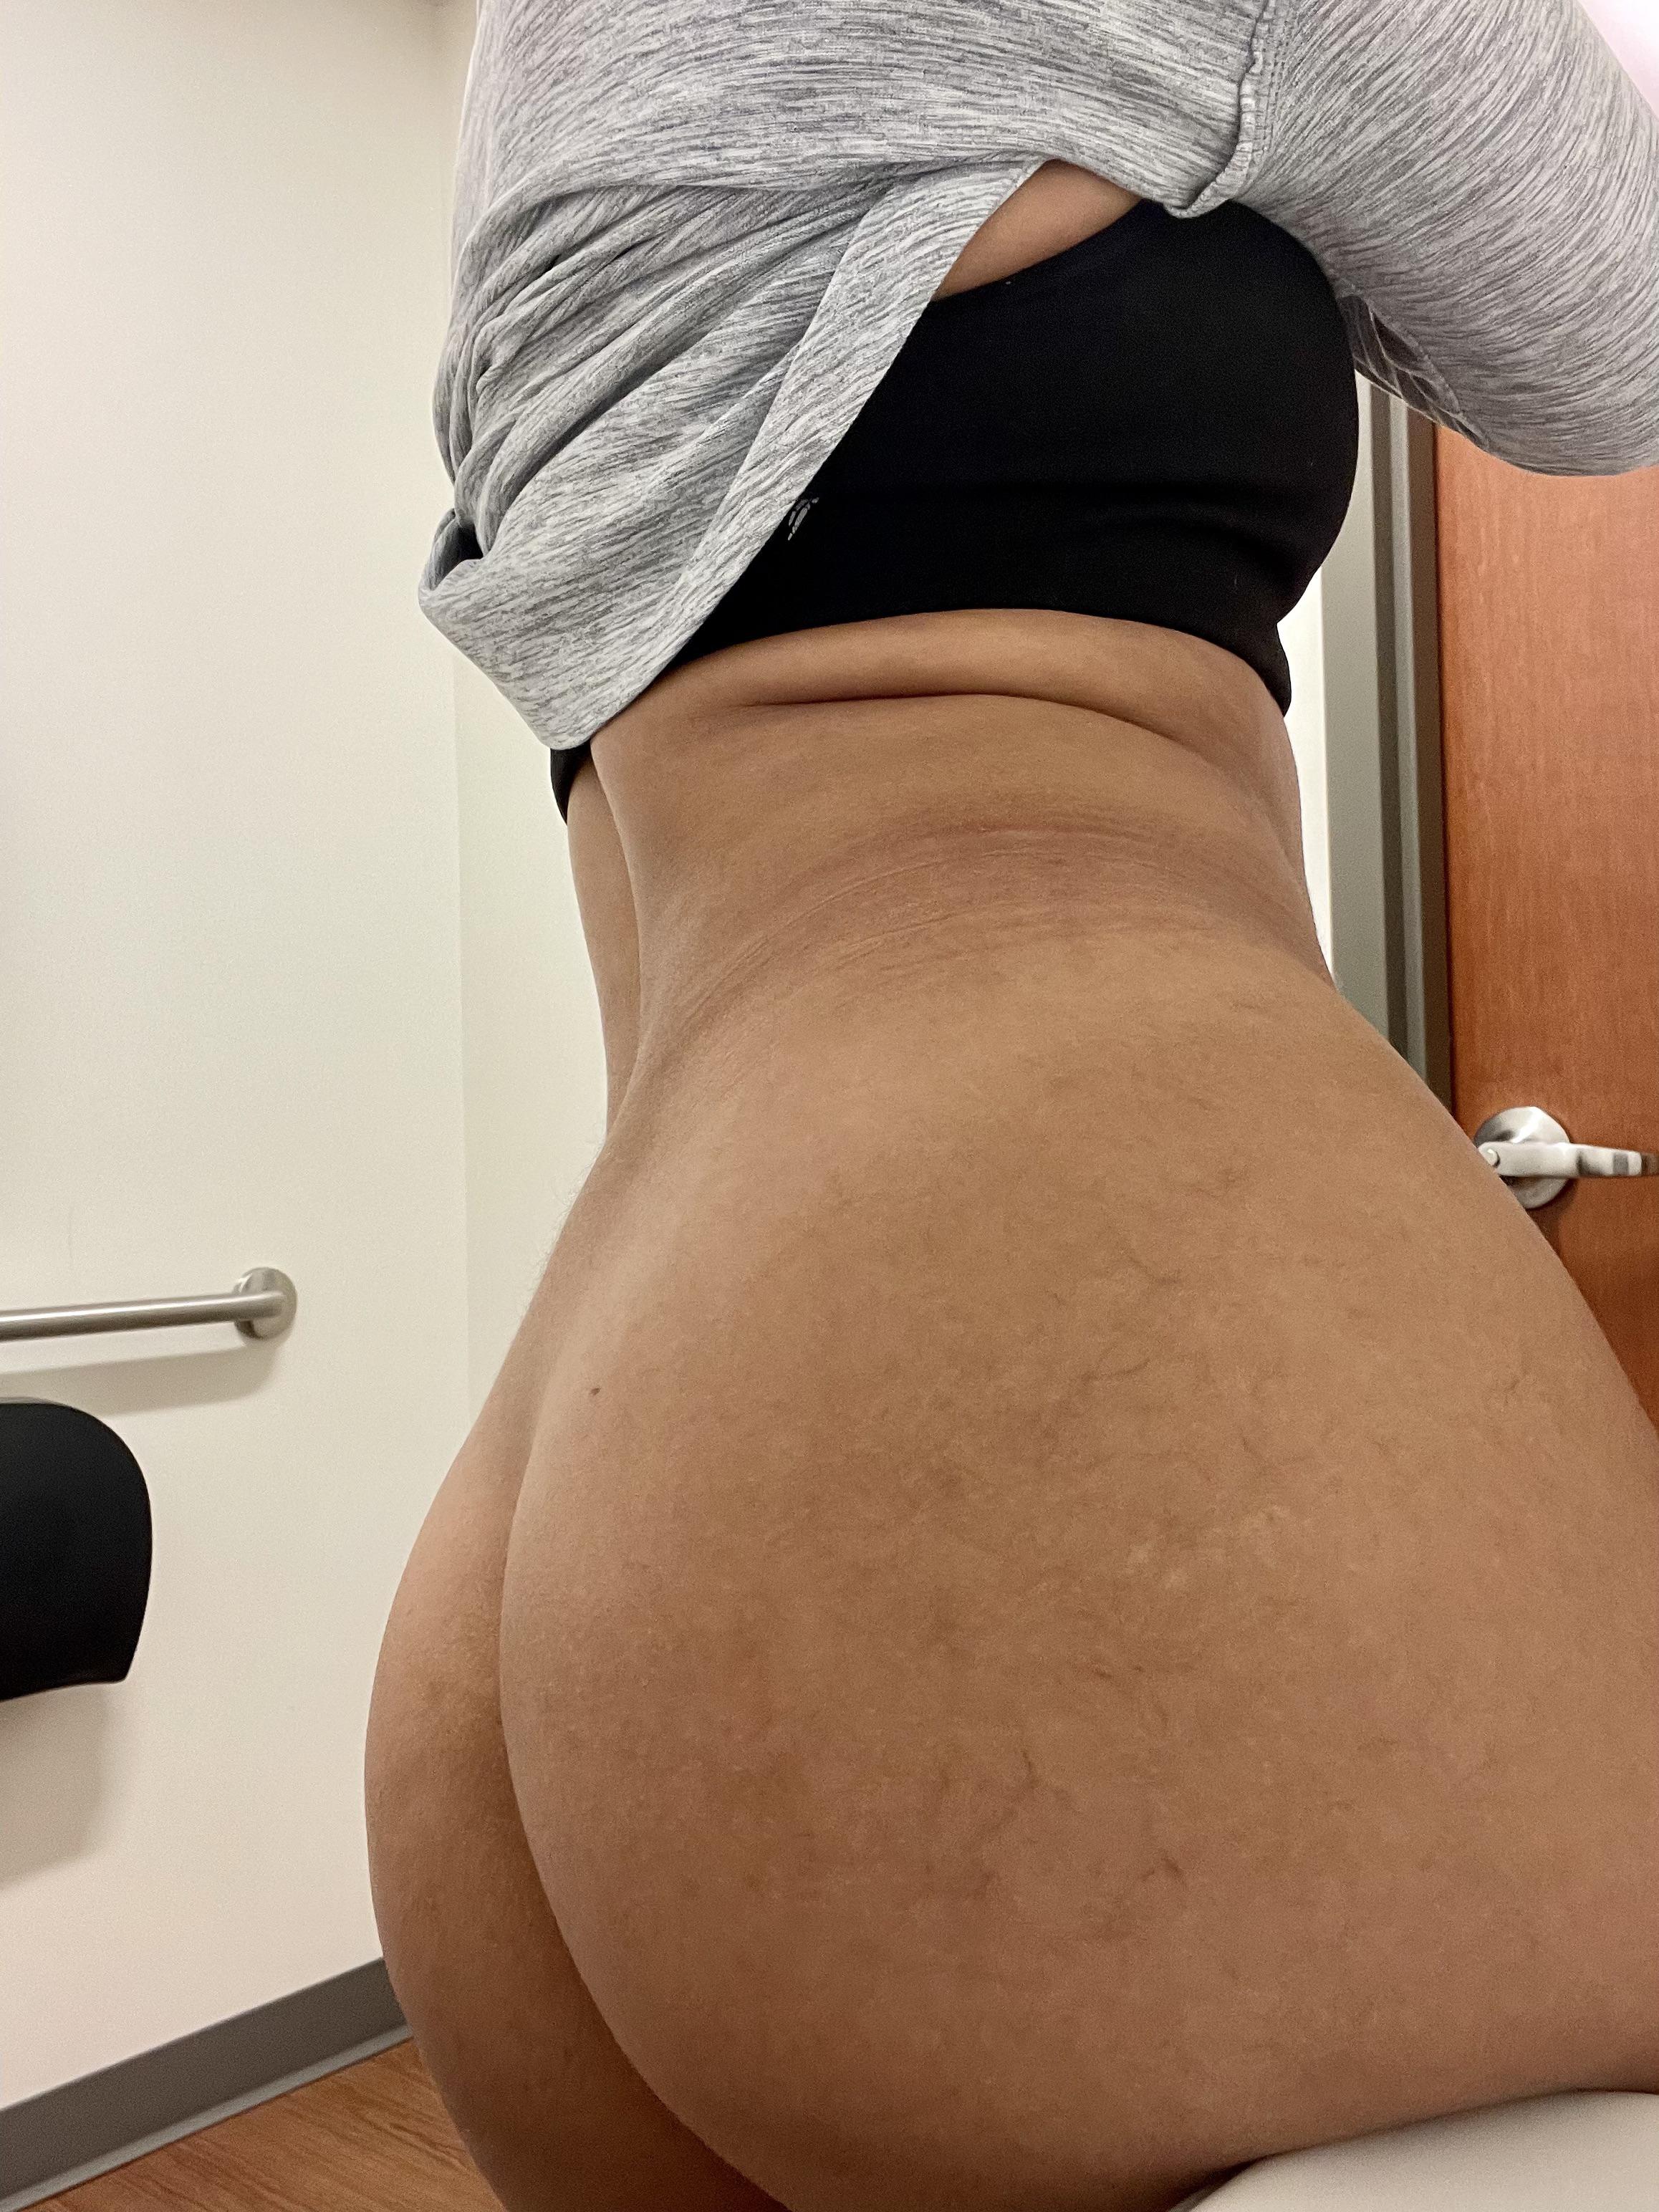 Anyone into Indian physicians with big asses? (f) Post By Nude Boobs skiicouple69 on gonewild, IndiansGoneWild